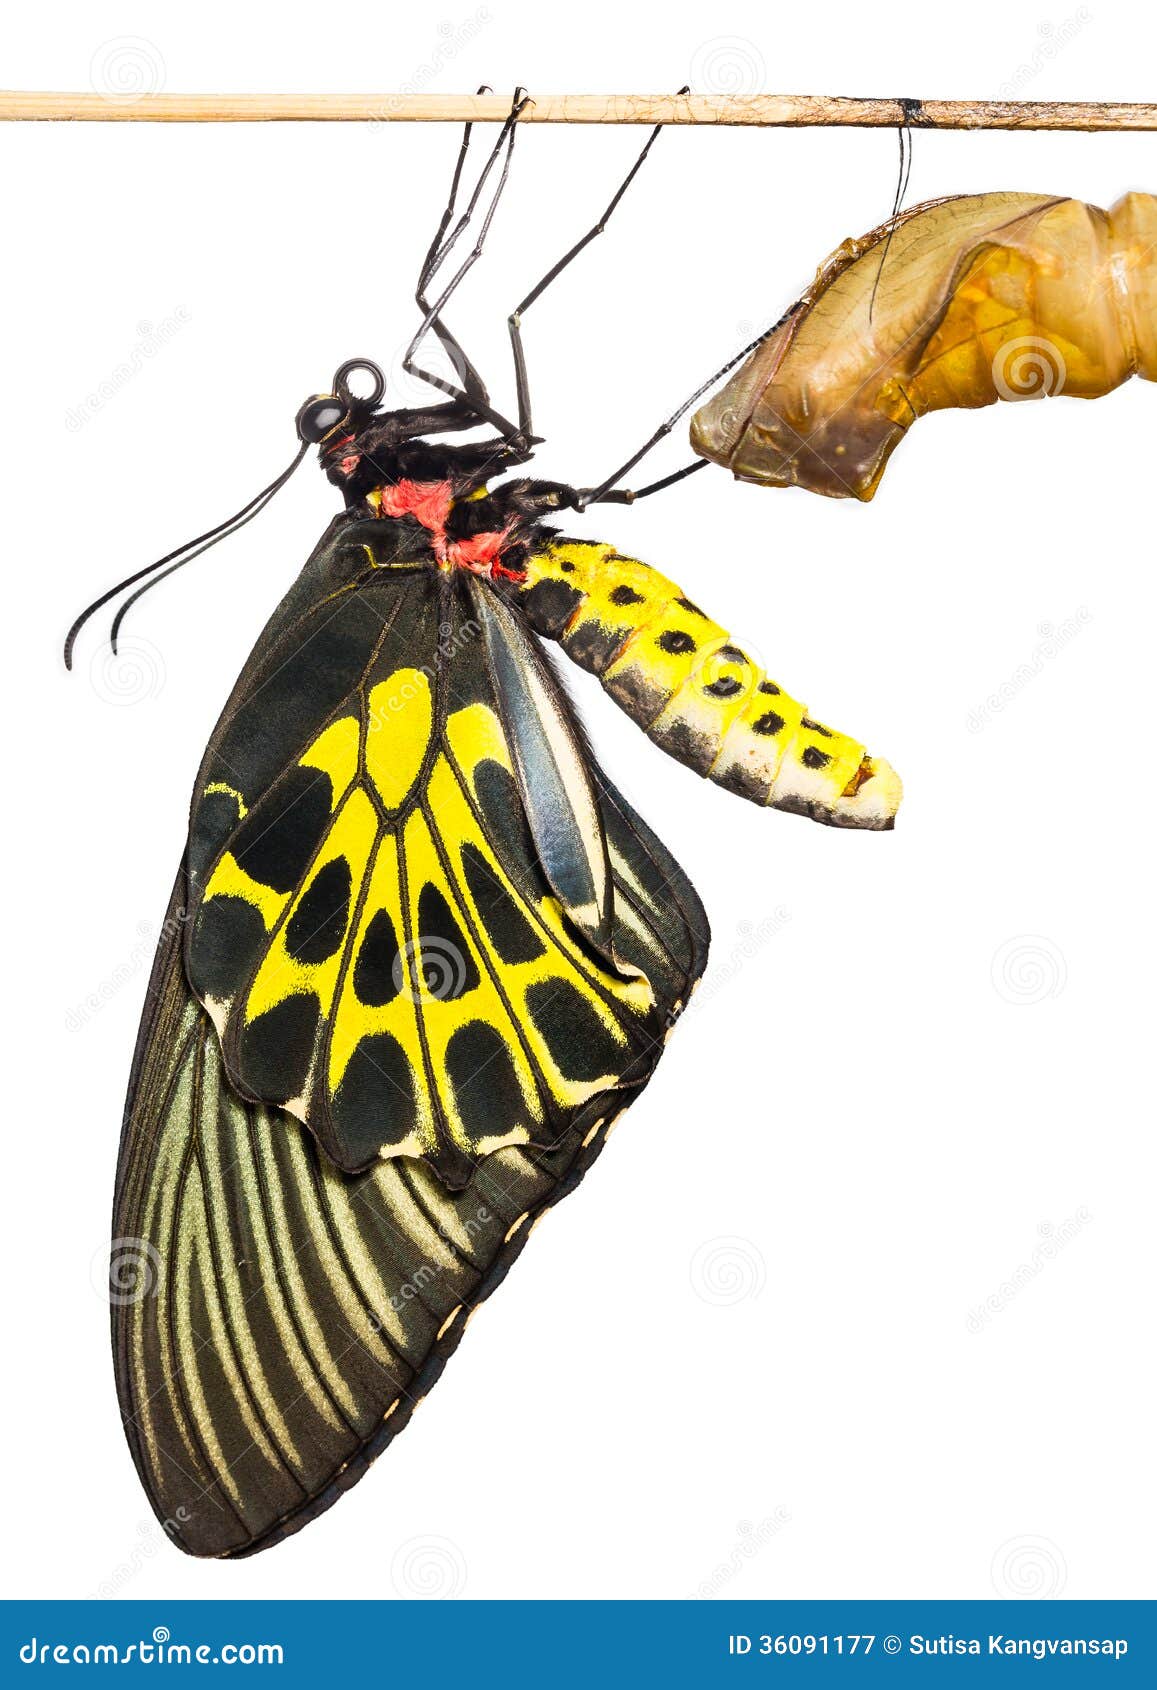 new born common birdwing butterfly emerge from cocoon